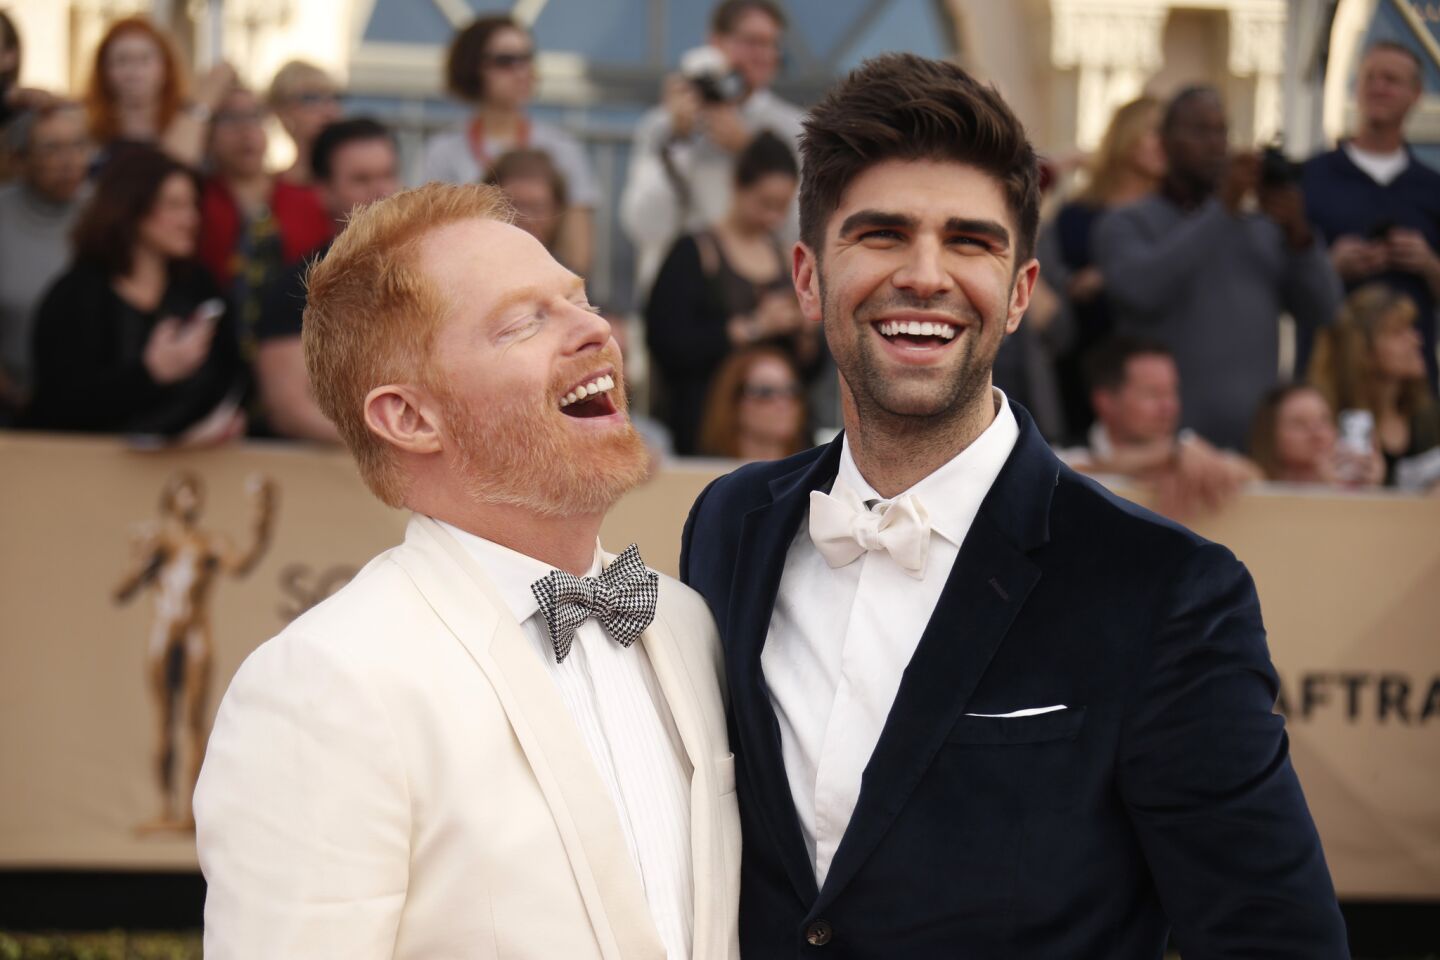 Jesse Tyler Ferguson, left, wth husband Justin Mikita, is nominated with his "Modern Family" cast mates.